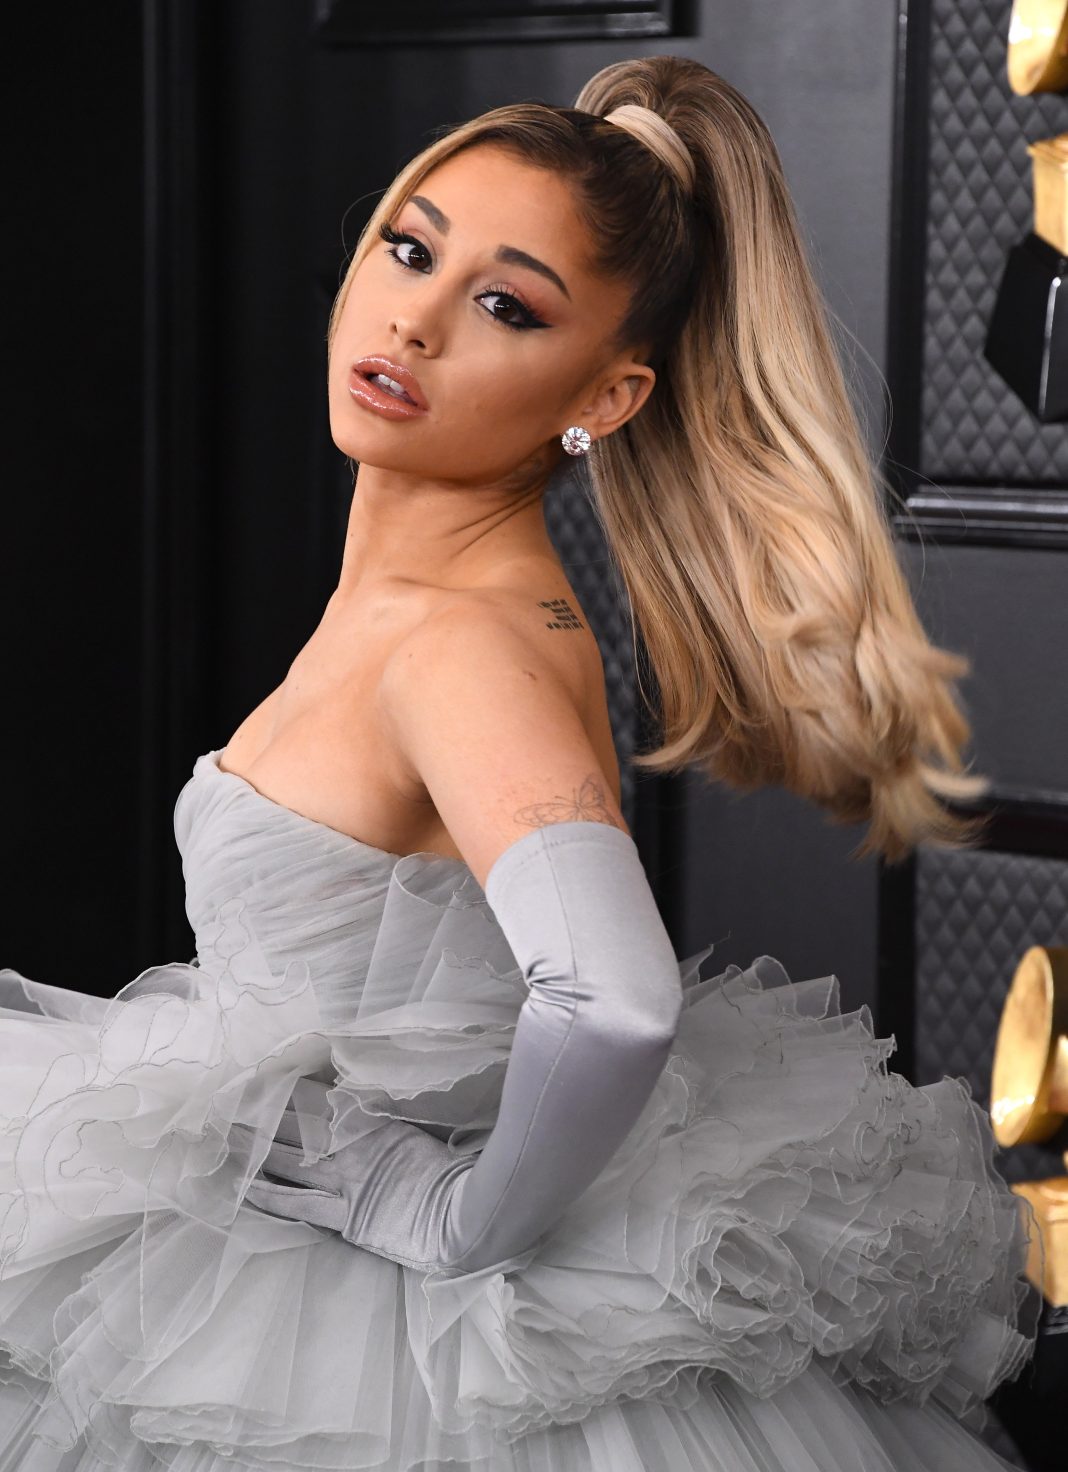 ariana-grande-brought-back-her-iconic-ponytail-hairstyle,-and-fans-are-excited-—-see-photos